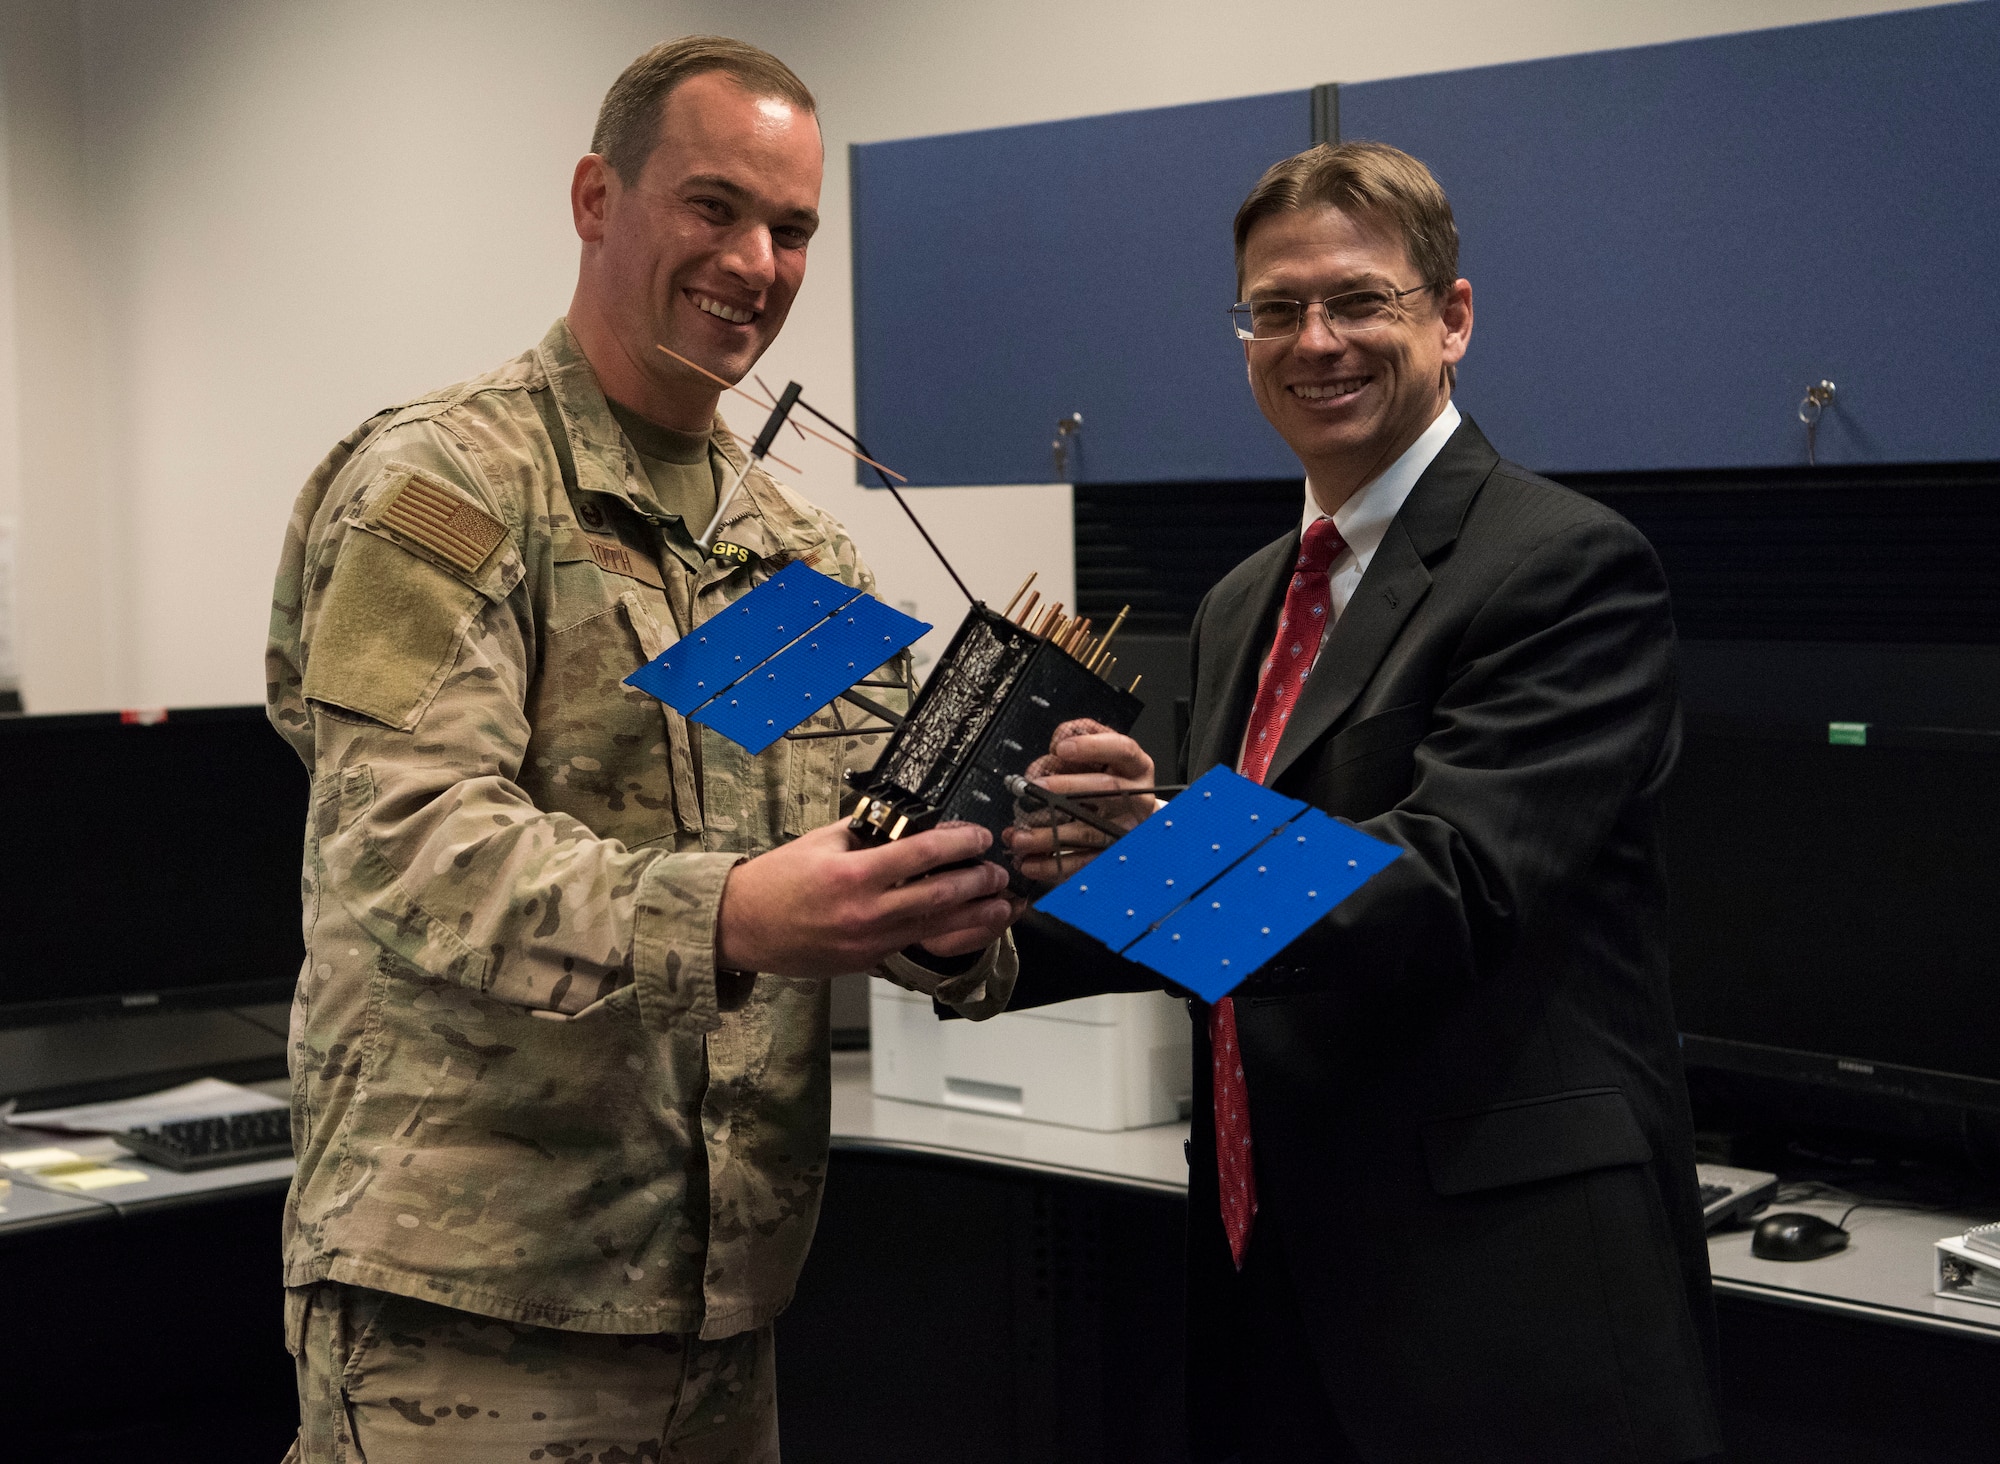 Johnathon Caldwell, Lockheed Martin Space vice president of navigation systems, right, presents Lt. Col. Stephen Toth, 2nd Space Operations Squadron commander, with a GPS III model satellite as a token of appreciation for the 2nd SOPS critical mission in space at Schriever Air Force Base, Colorado, July 29, 2019. The 2nd SOPS operates the largest Department of Defense spacecraft constellation using the Master Control Station and a worldwide network of monitor stations and ground antennas. (U.S. Air Force photo by Airman 1st Class Jonathan Whitely)